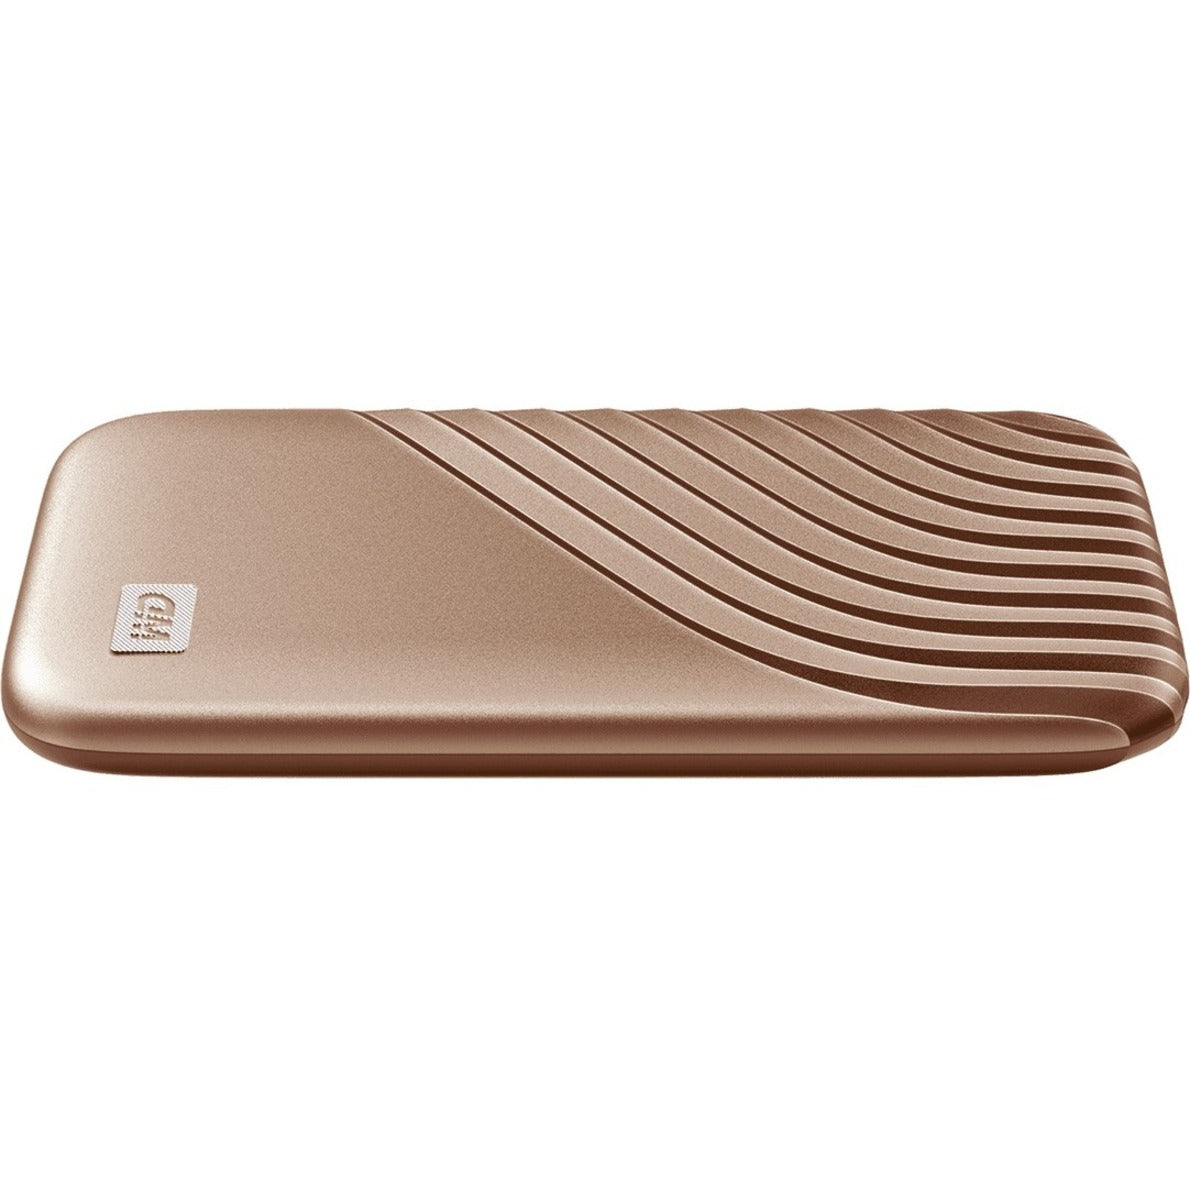 WD My Passport WDBAGF0020BGD-WESN 2 TB Portable Solid State Drive - External - Gold